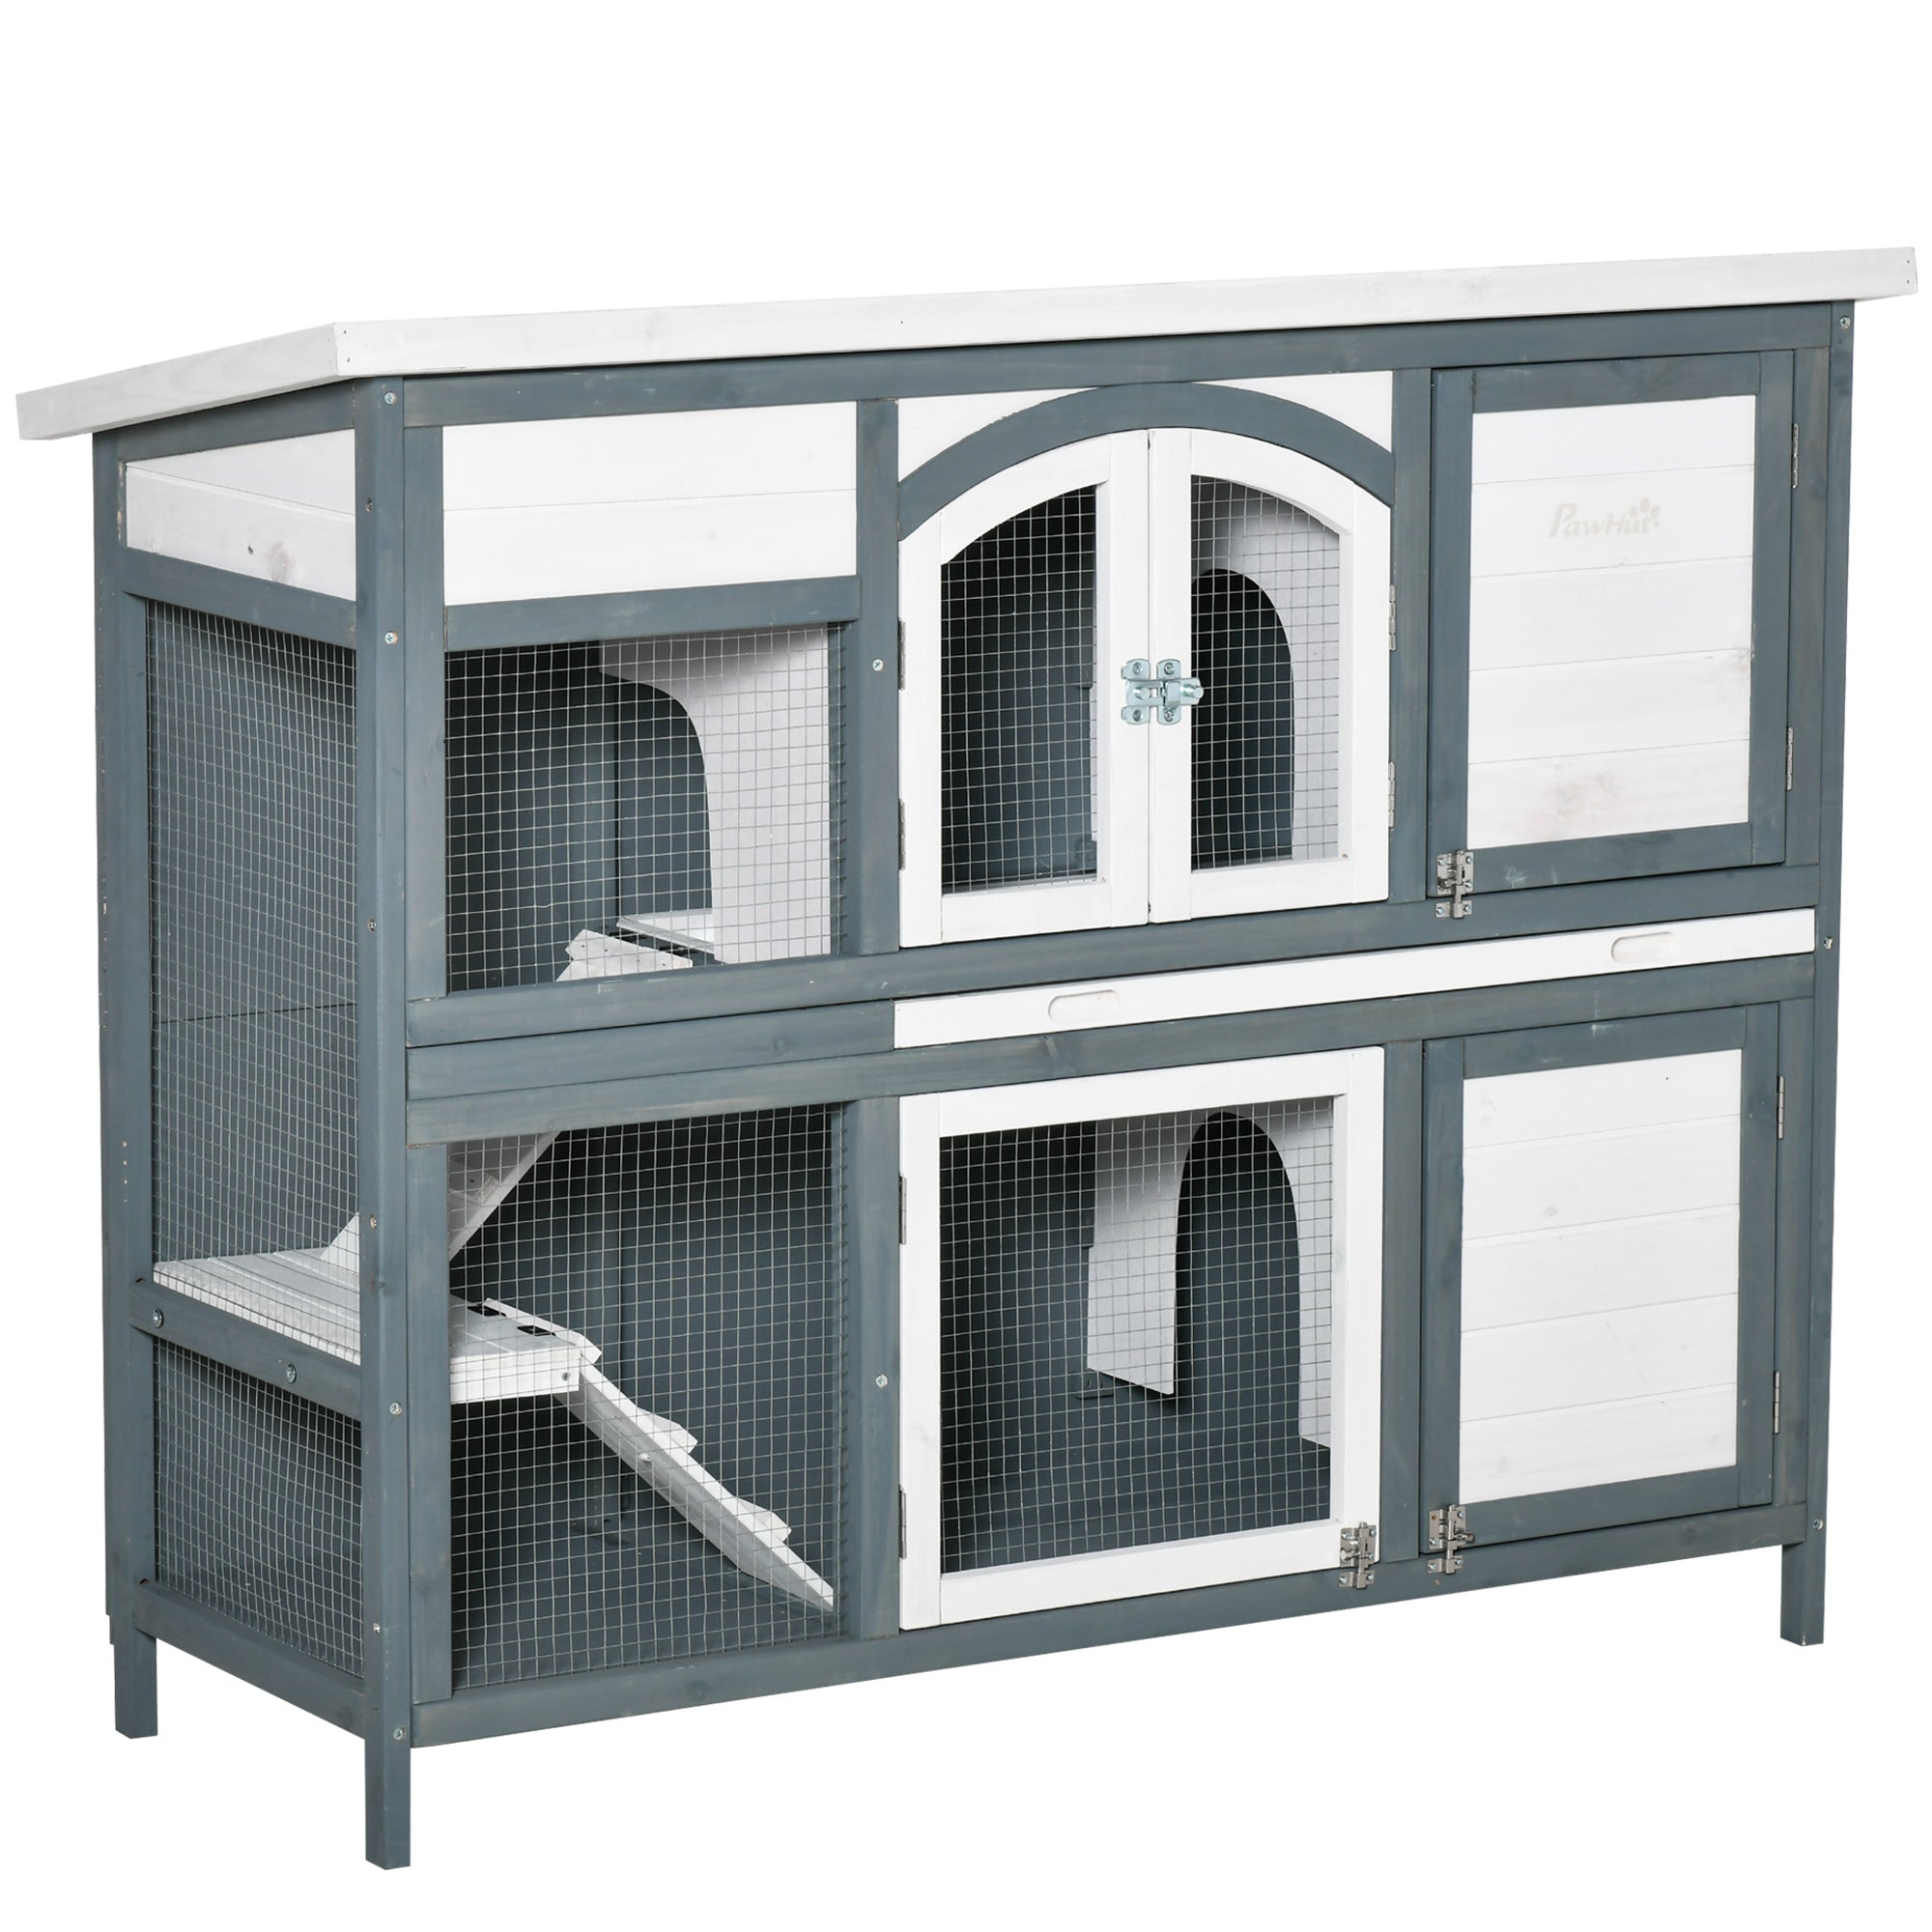 Two-Tier Wooden Rabbit Hutch Guinea Pig Cage w/ Openable Roof, Slide-Out Tray, Ramp - Grey, PawHut,